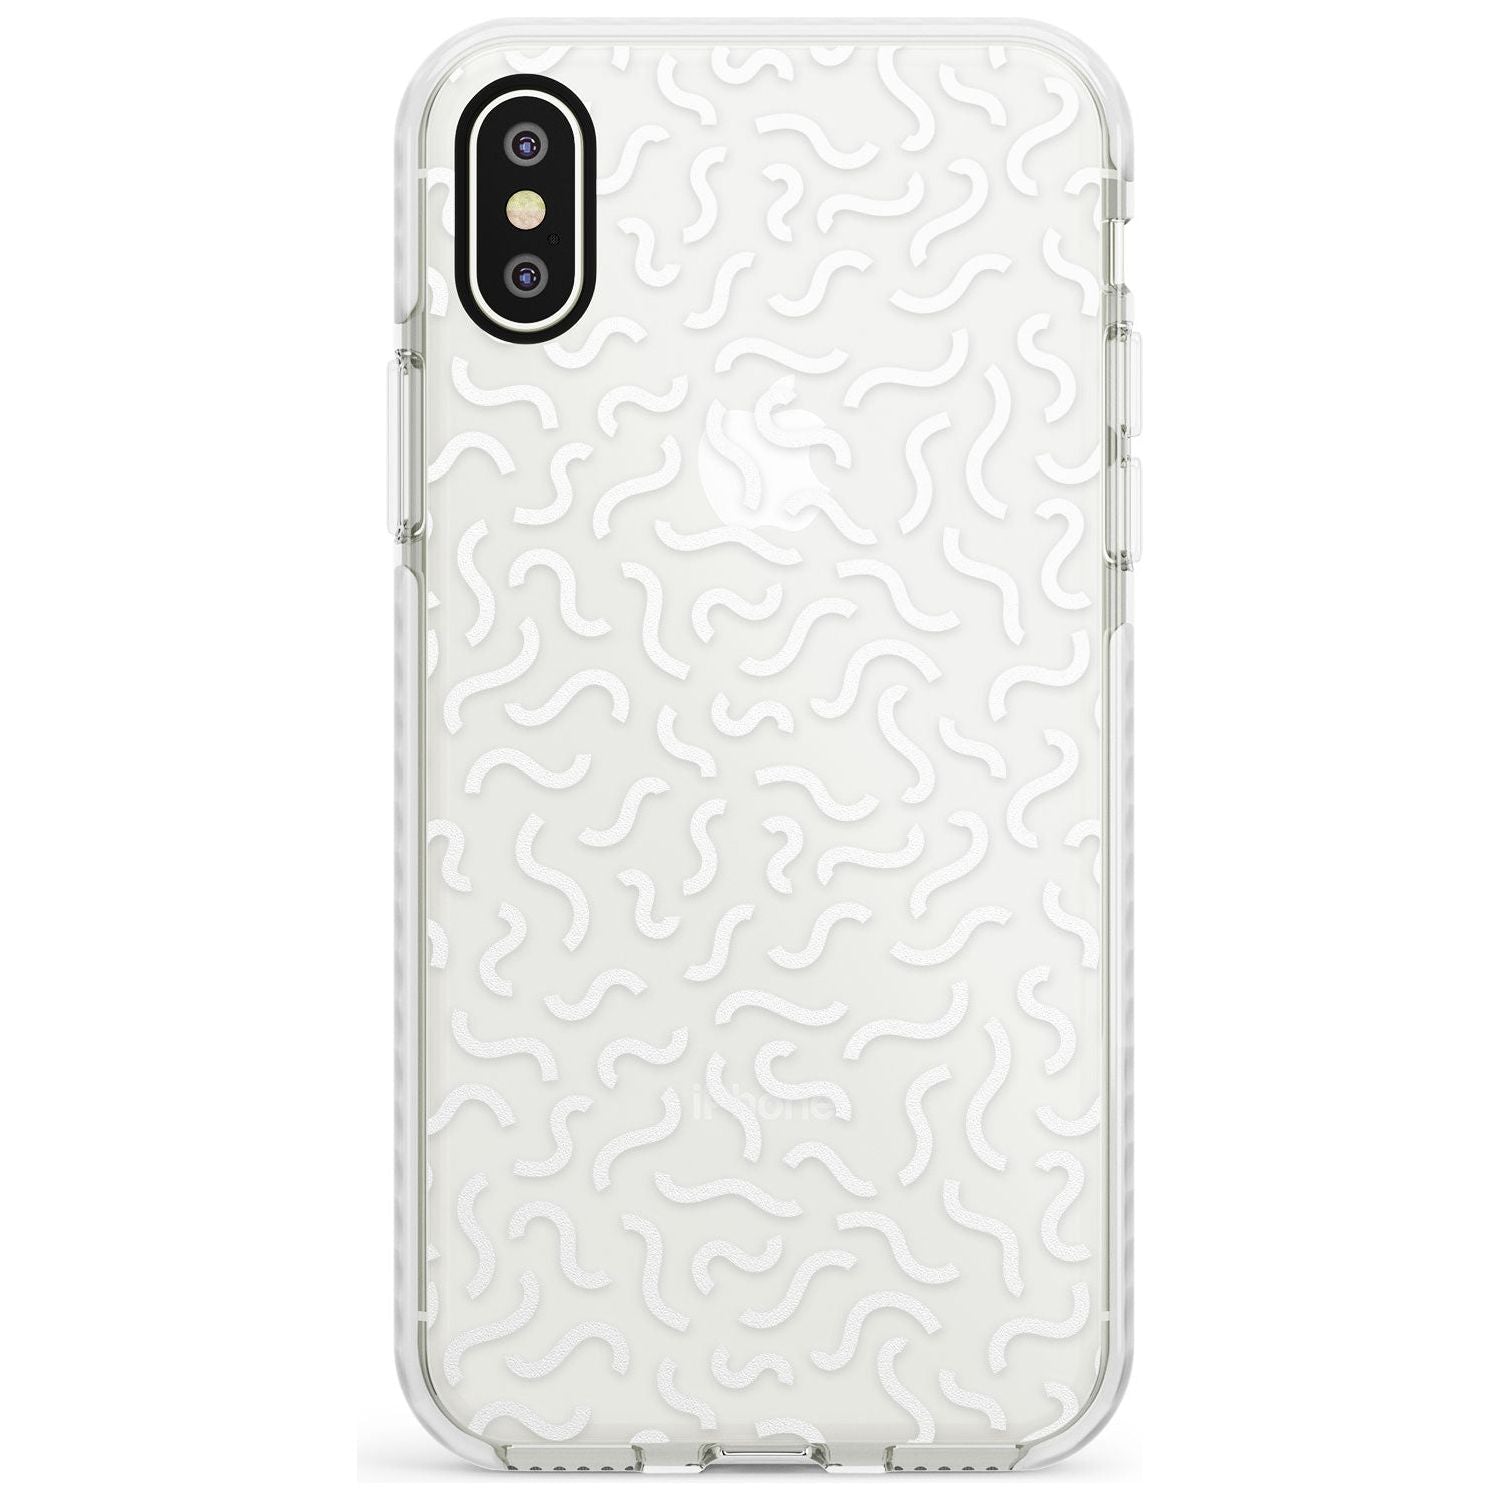 White Wavy Squiggles Memphis Retro Pattern Design Impact Phone Case for iPhone X XS Max XR